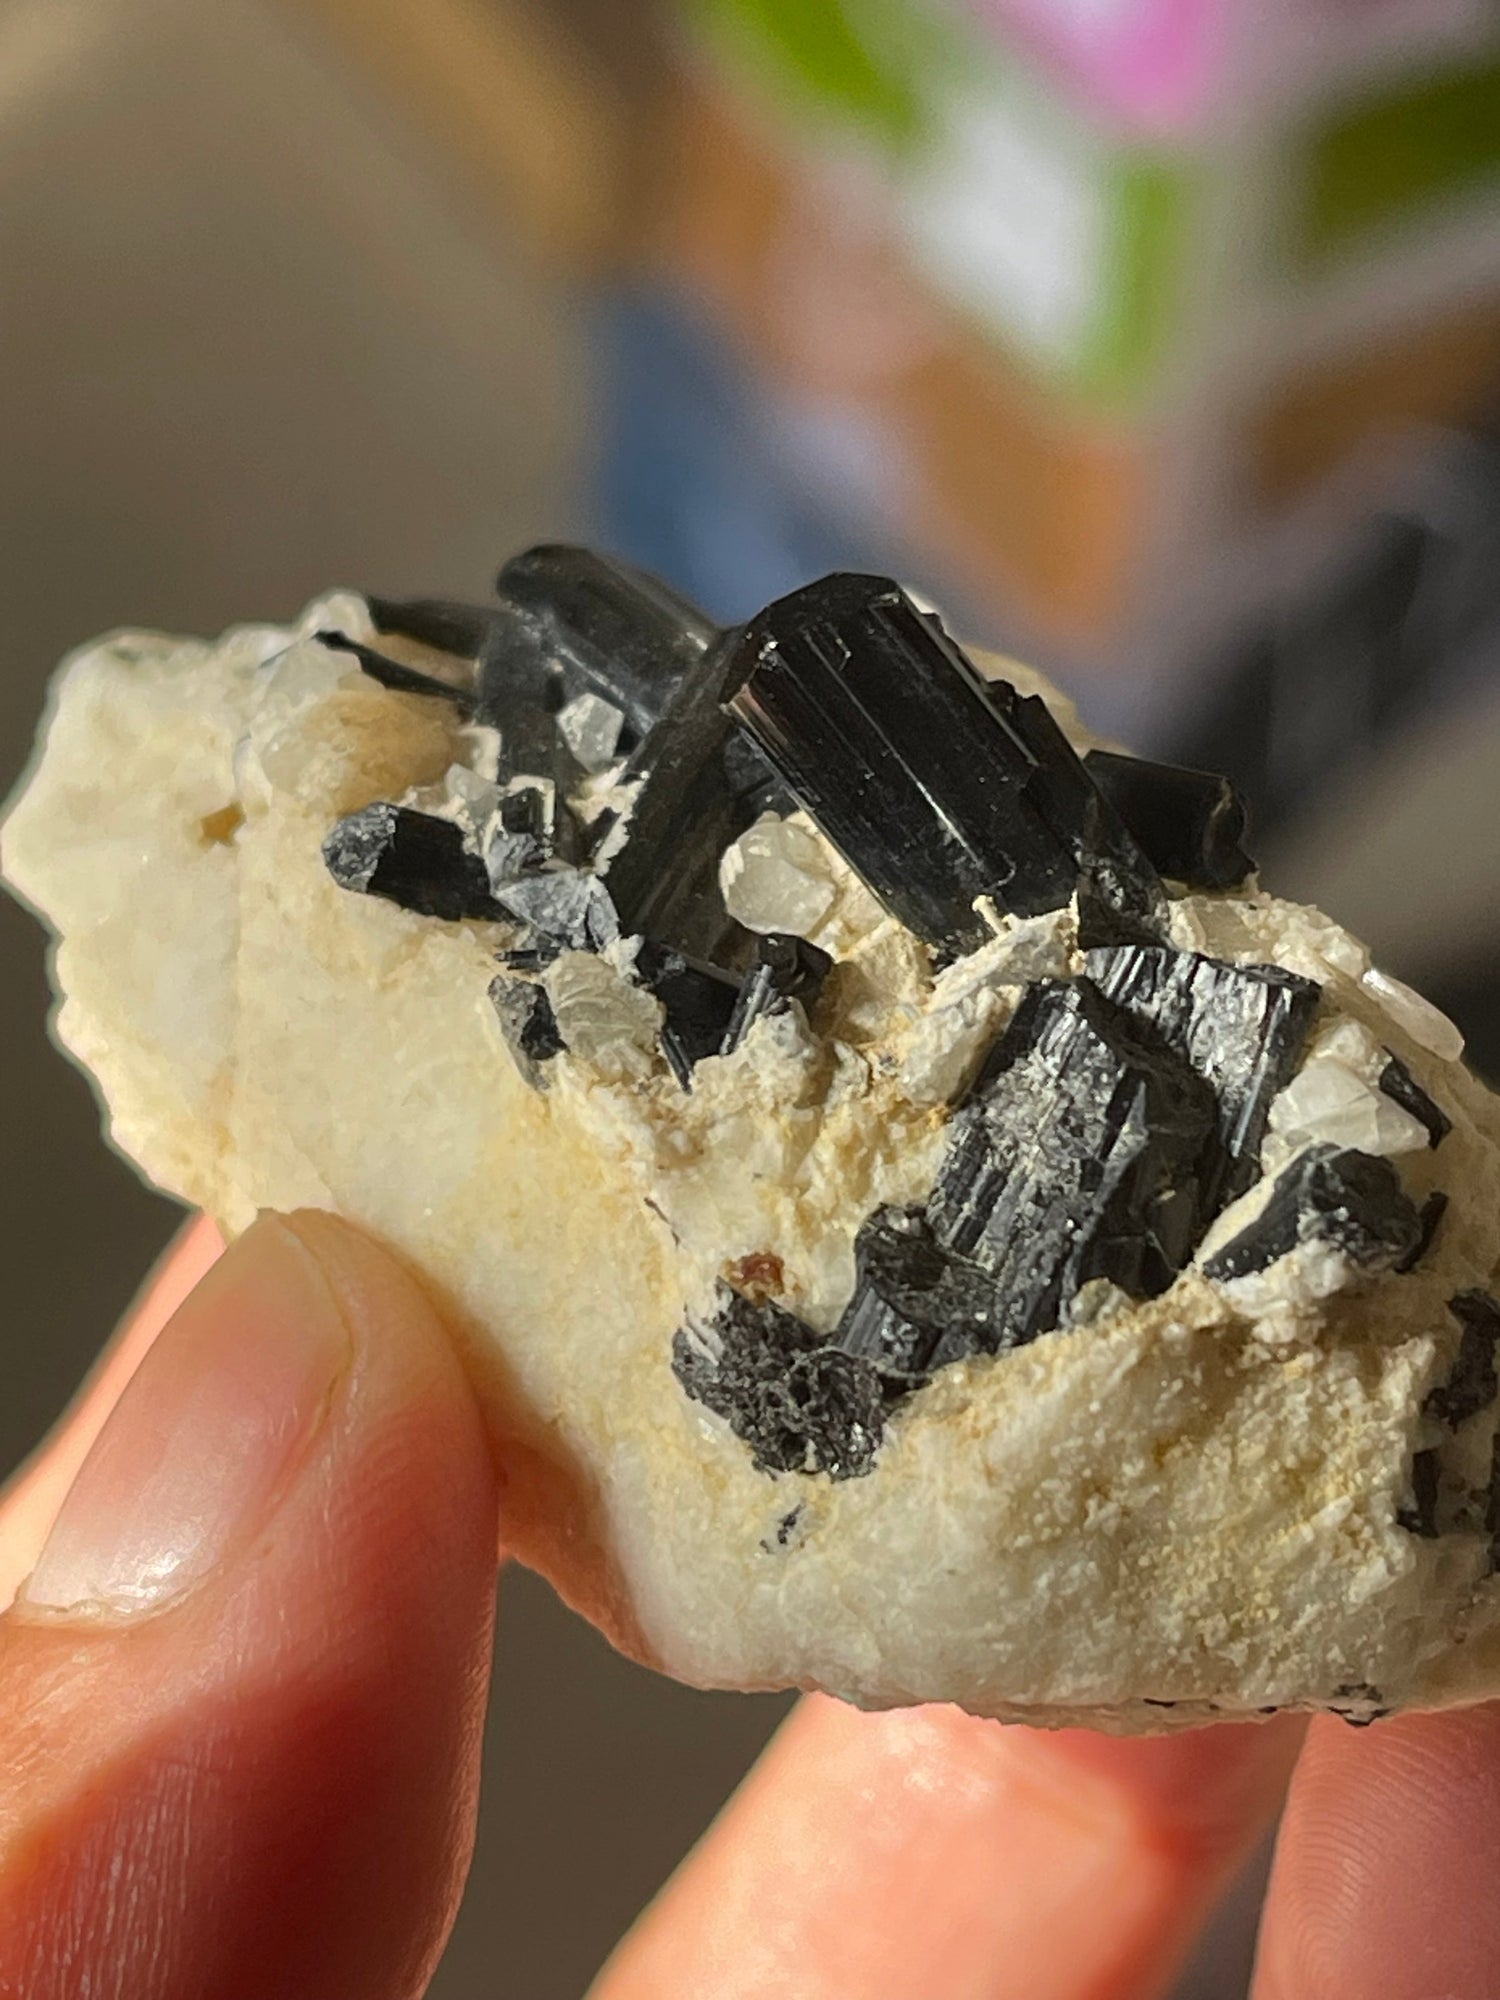 You May Also Like This Black Tourmaline Specimen.